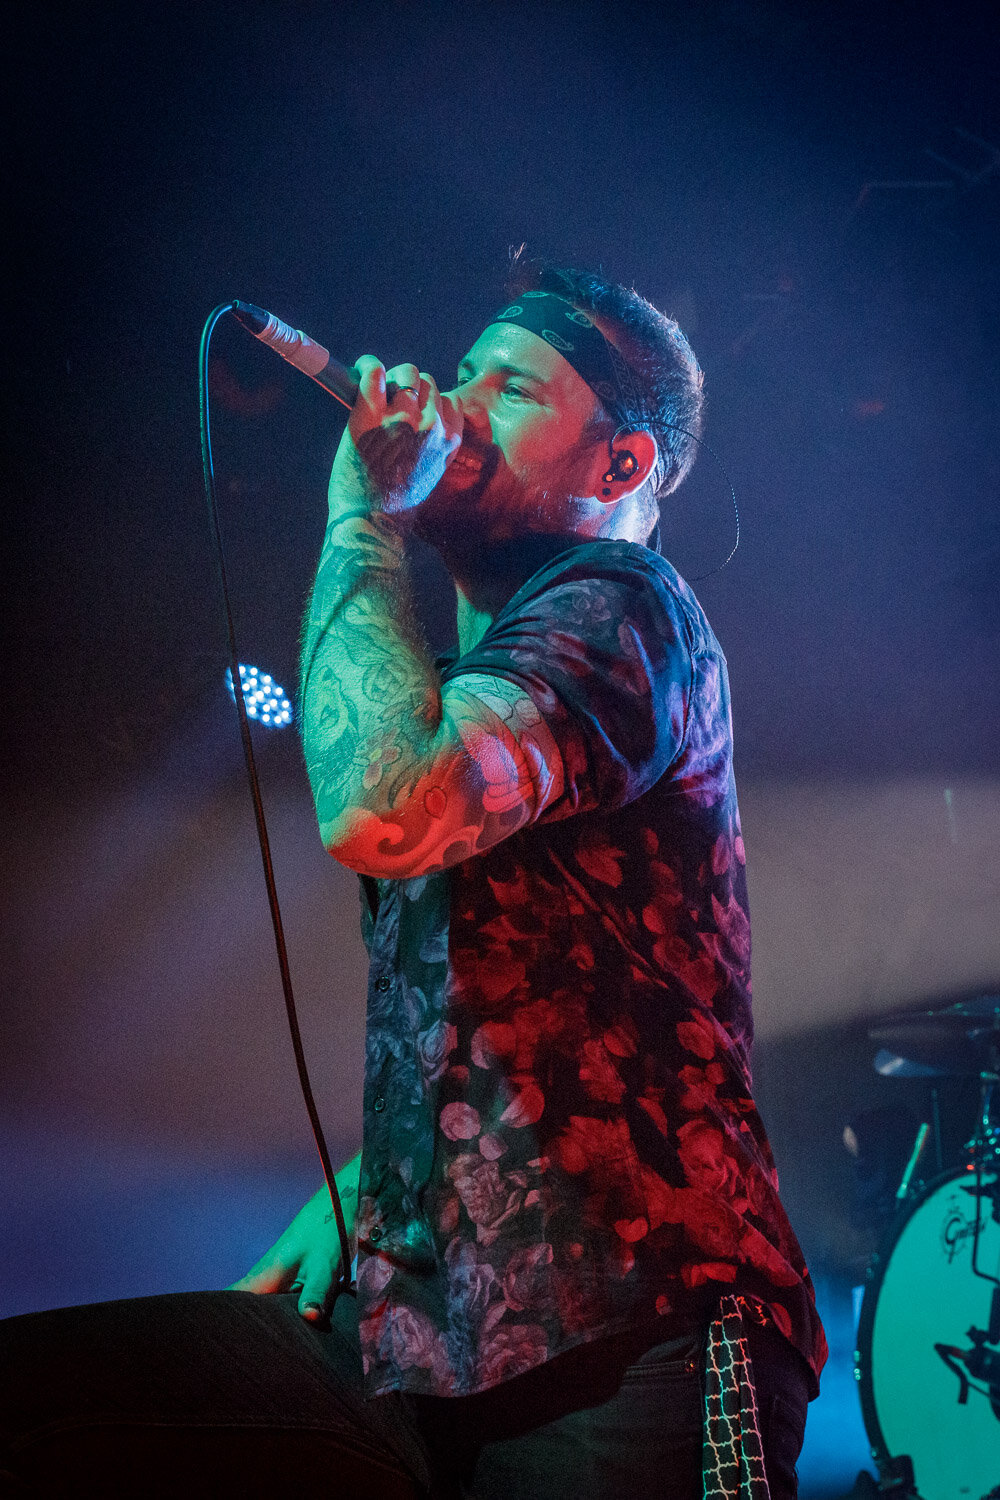 Beartooth at the Manchester Academy on February 28th 2020